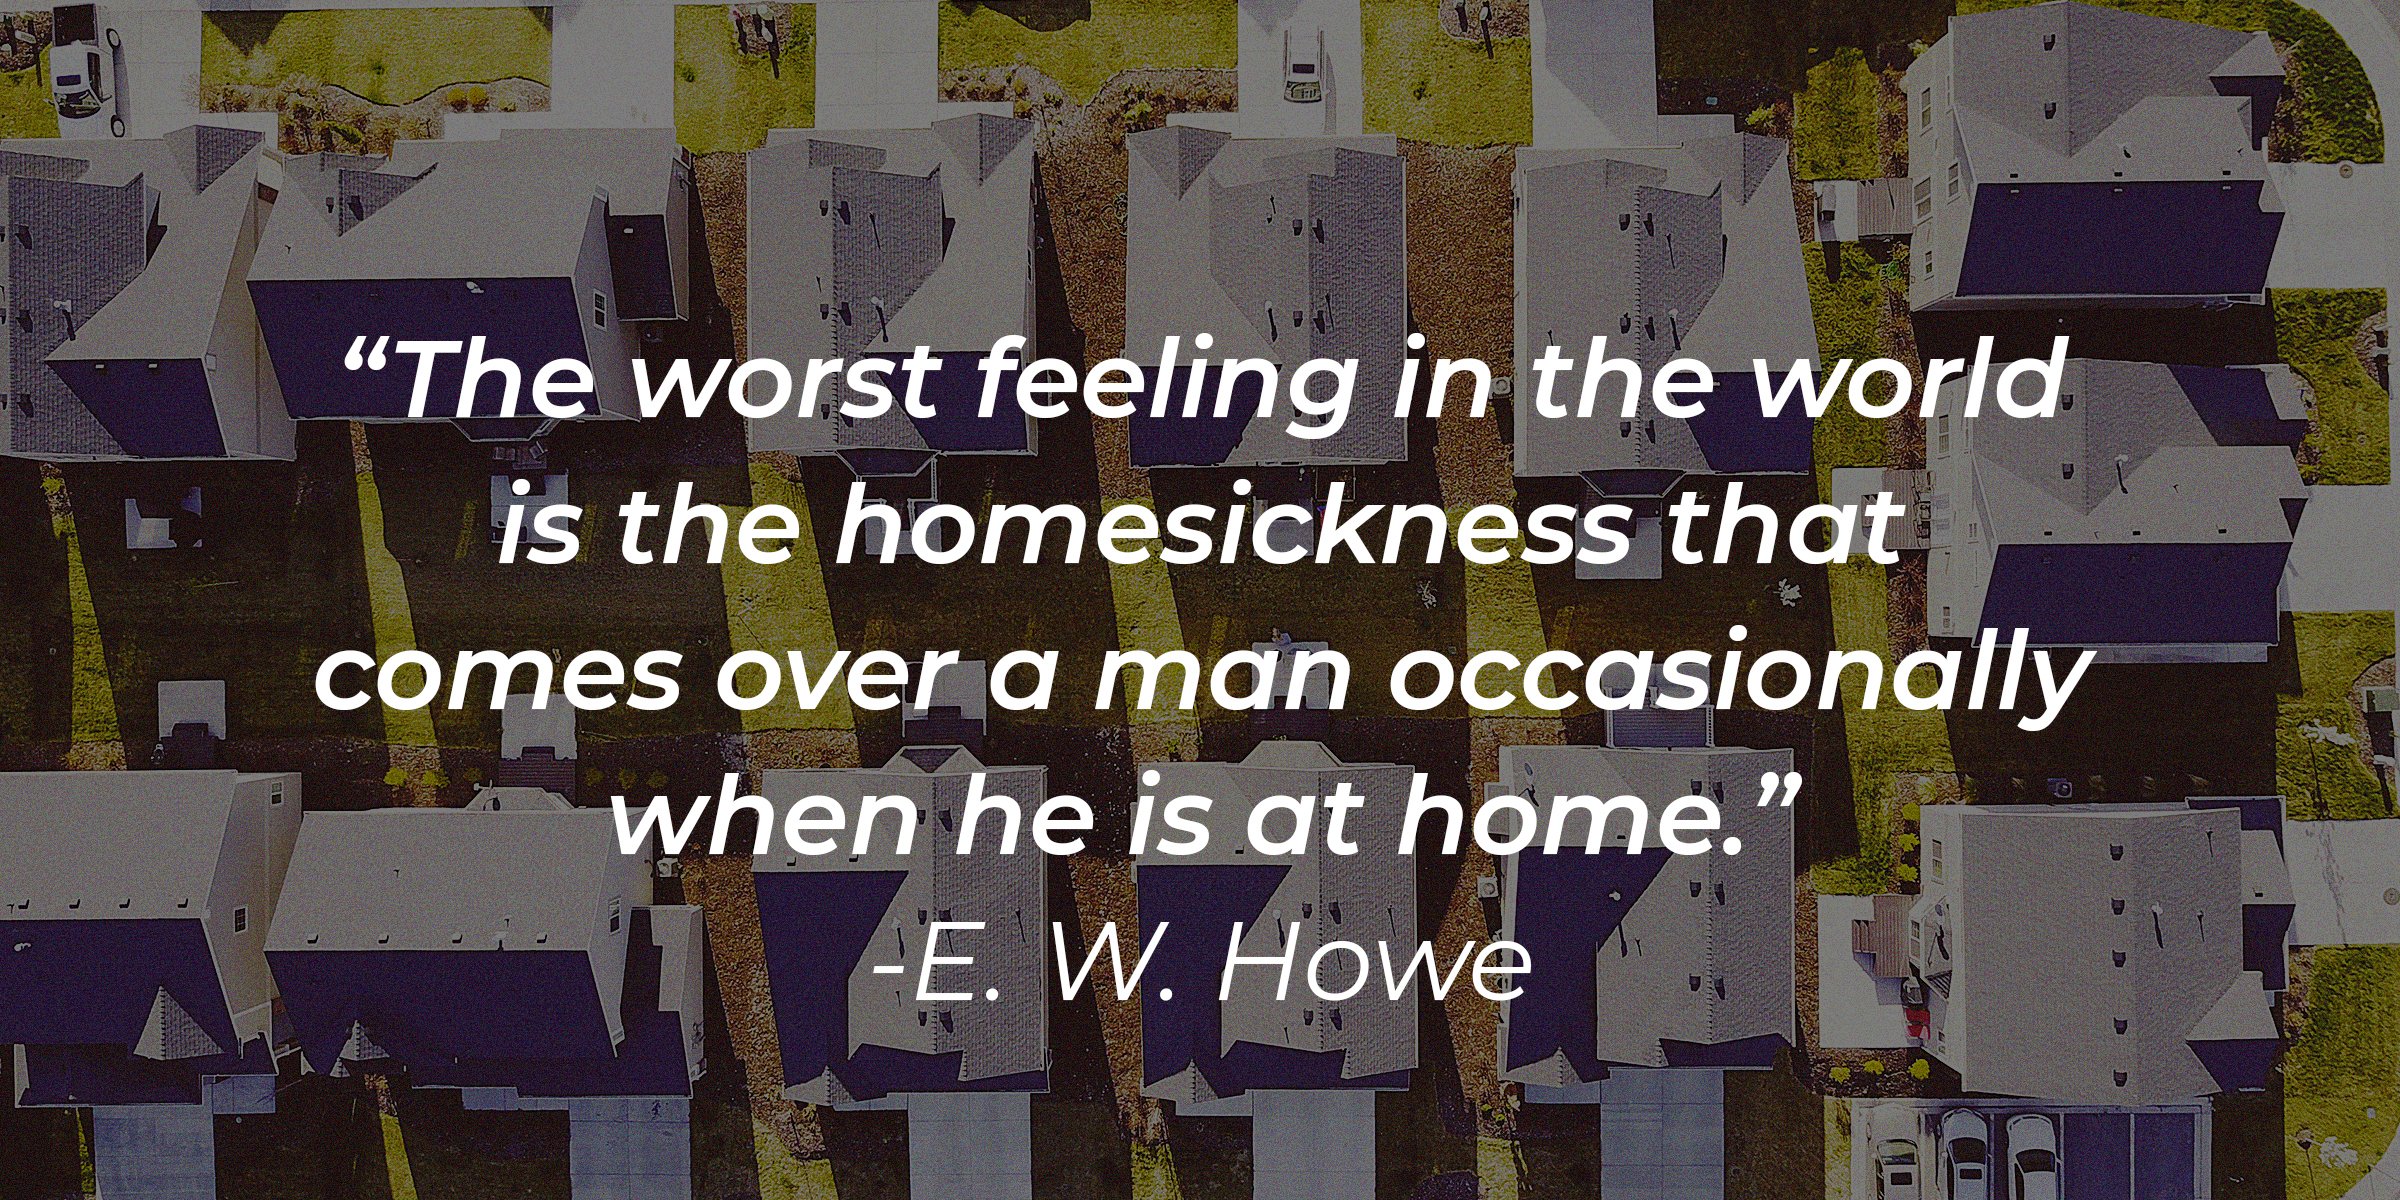 Source: Unsplash | Rows of homes with the quote: "The worst feeling in the world is the homesickness that comes over a man occasionally when he is at home."